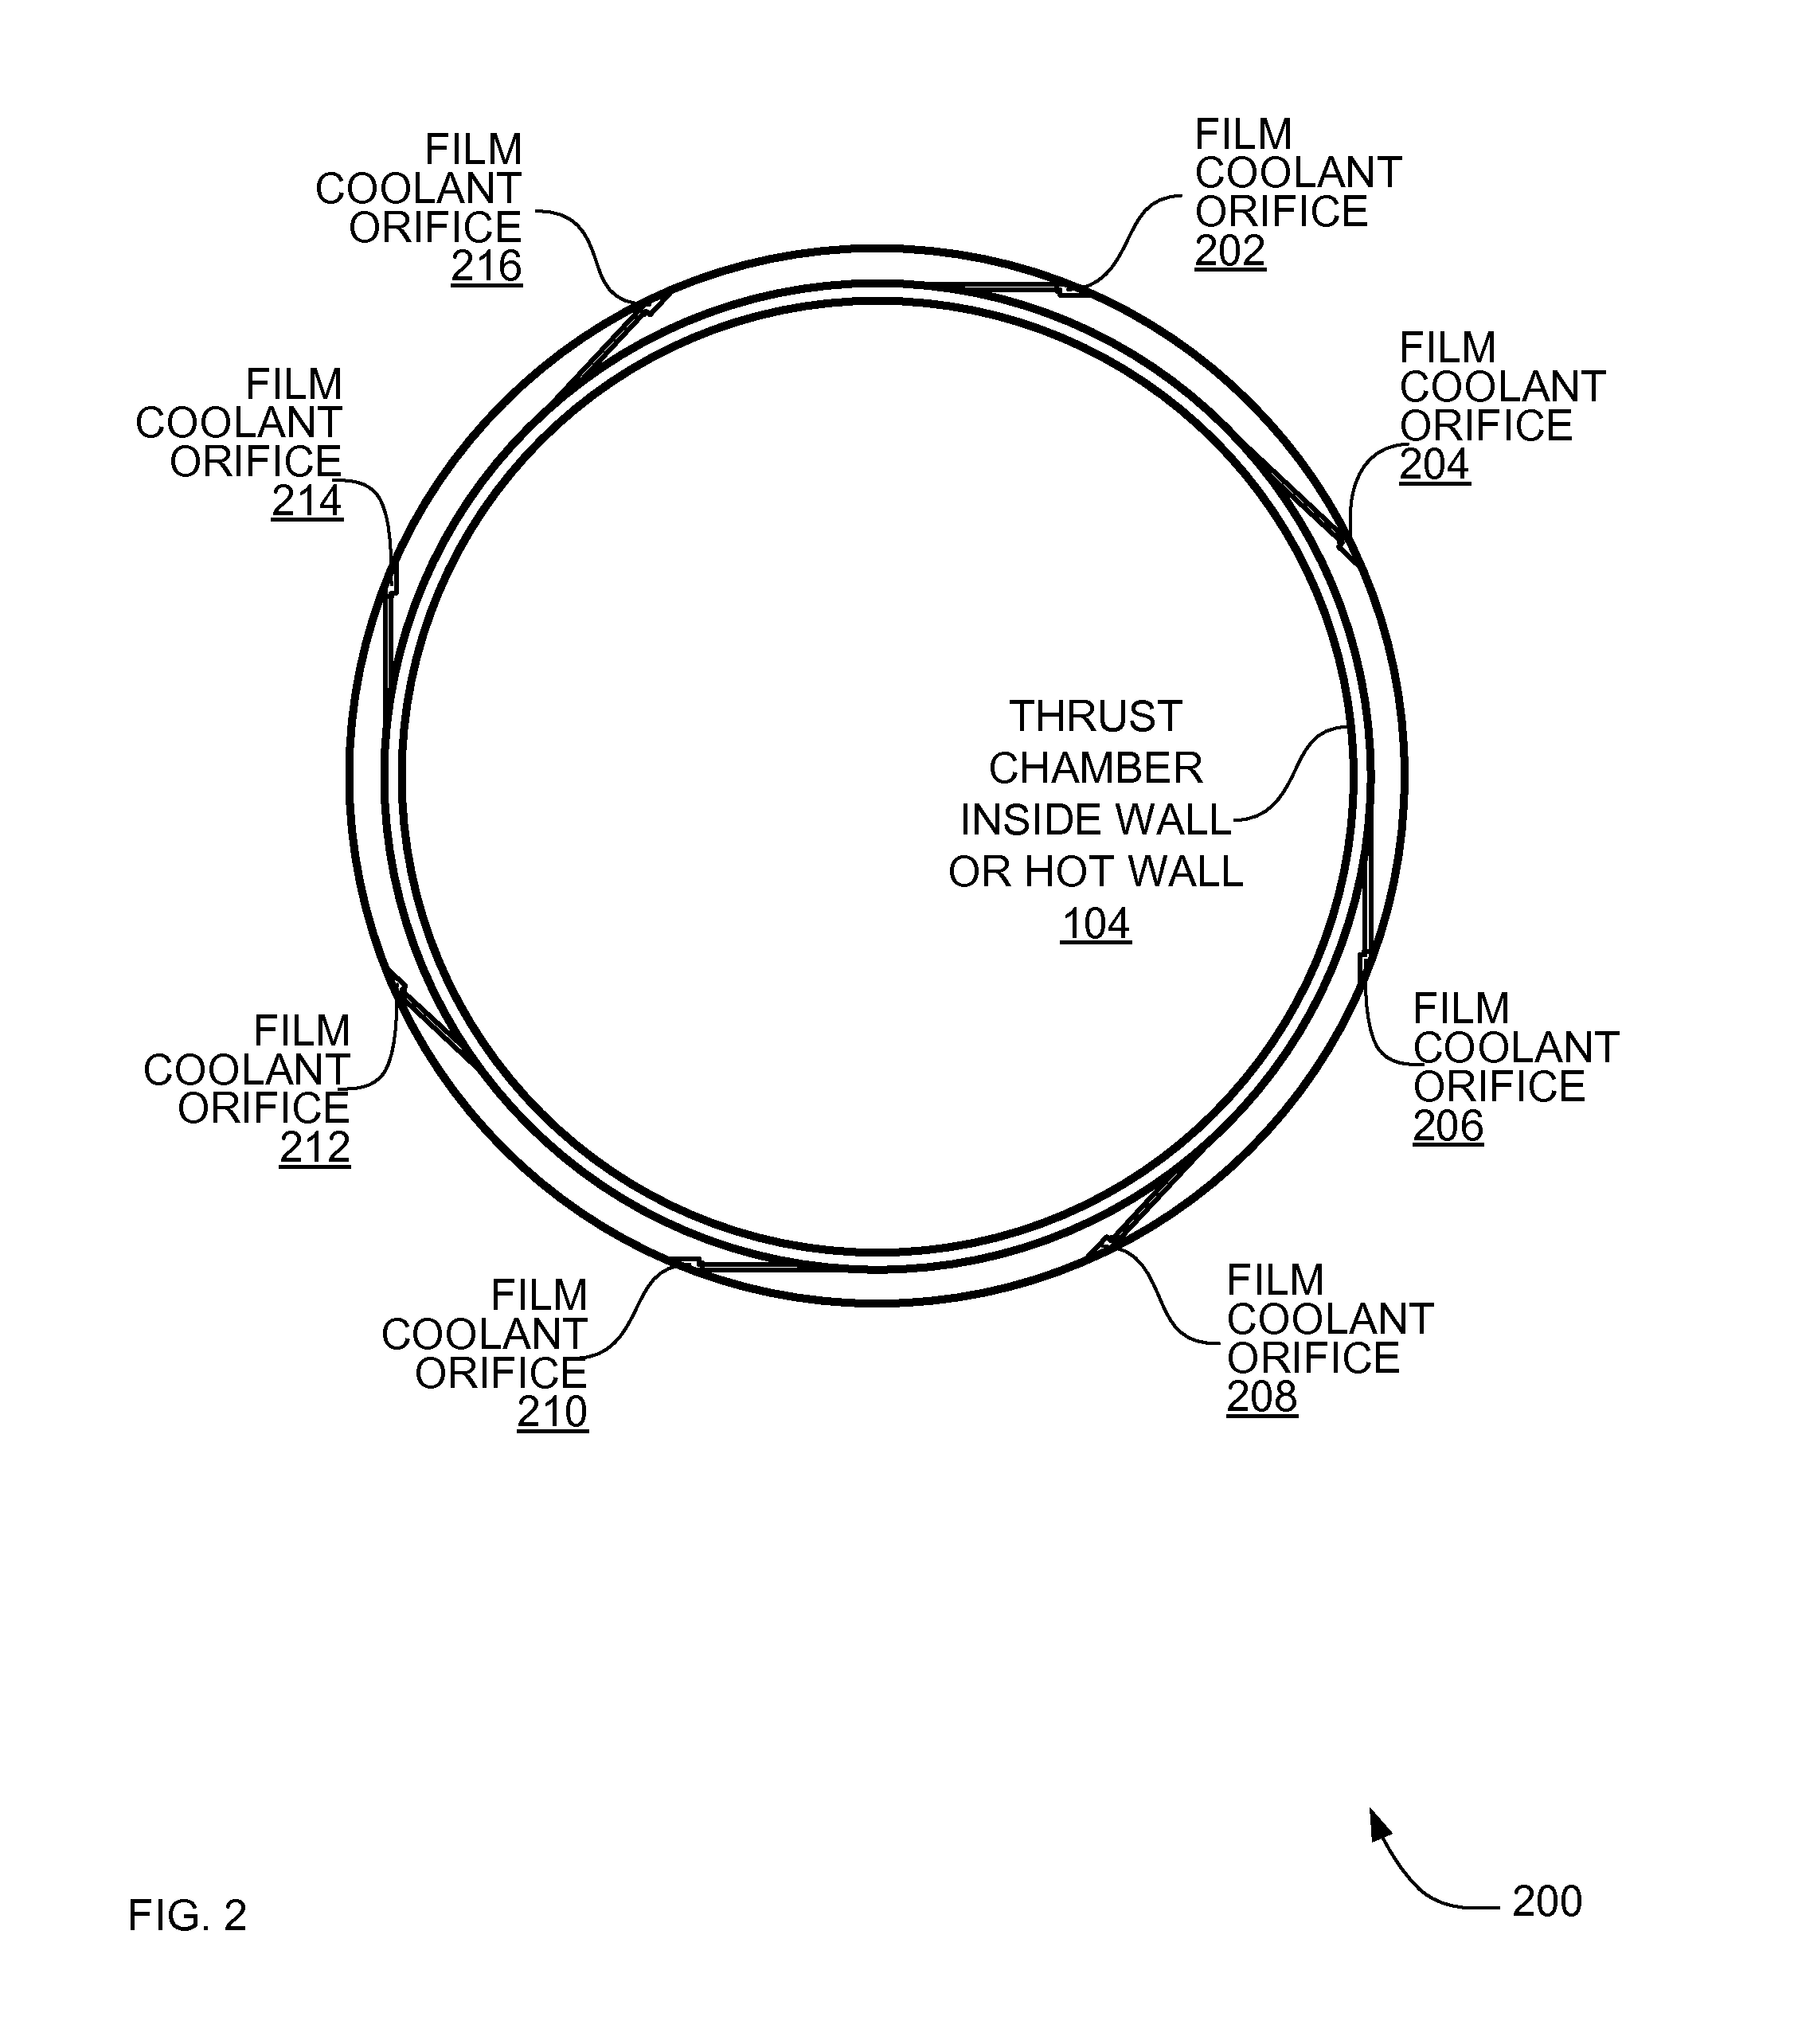 Systems, methods and apparatus for propulsion